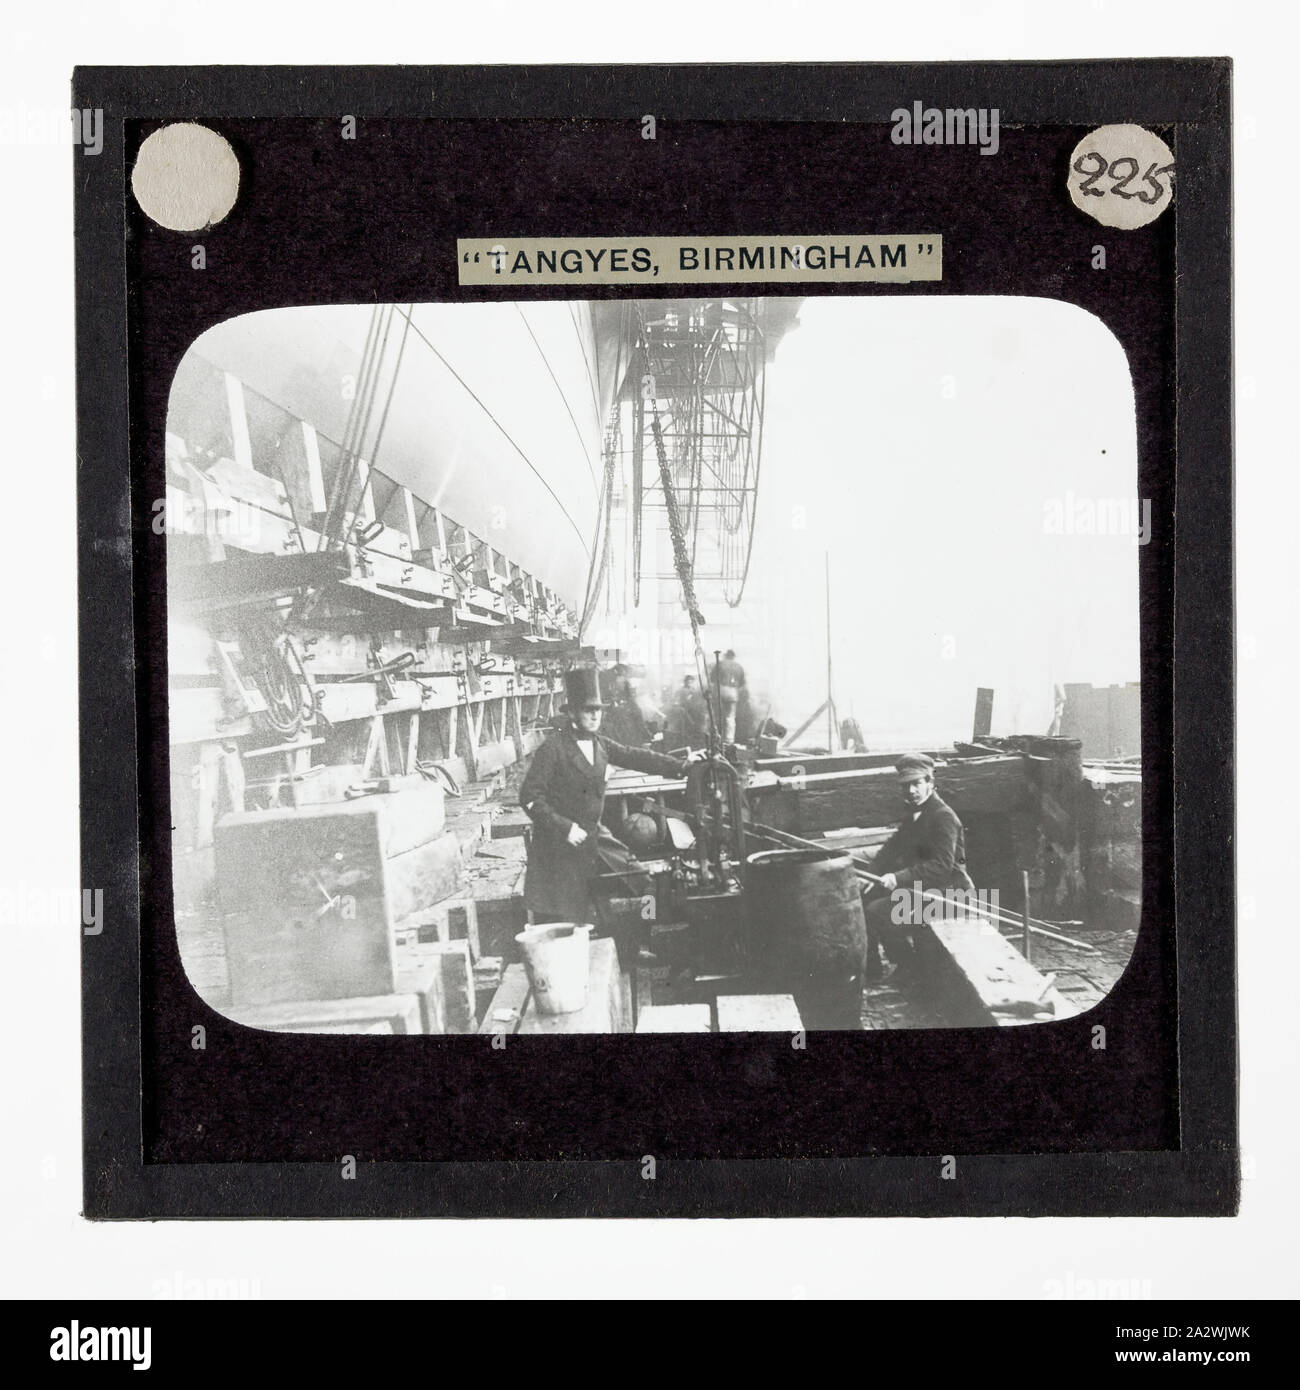 Lantern Slide - Tangyes Ltd, Richard Tangye with SS Great Eastern, 1858, One of 239 glass lantern slides depicting products manufactured by Tangyes Limited engineers of Birmingham, England. The images include various products such as engines, centrifugal pumps, hydraulic pumps, gas producers, materials testing machines, presses, machine tools, hydraulic jacks etc. Tangyes was a company which operated from 1857 to 1957. They produced a wide variety of engineering Stock Photo